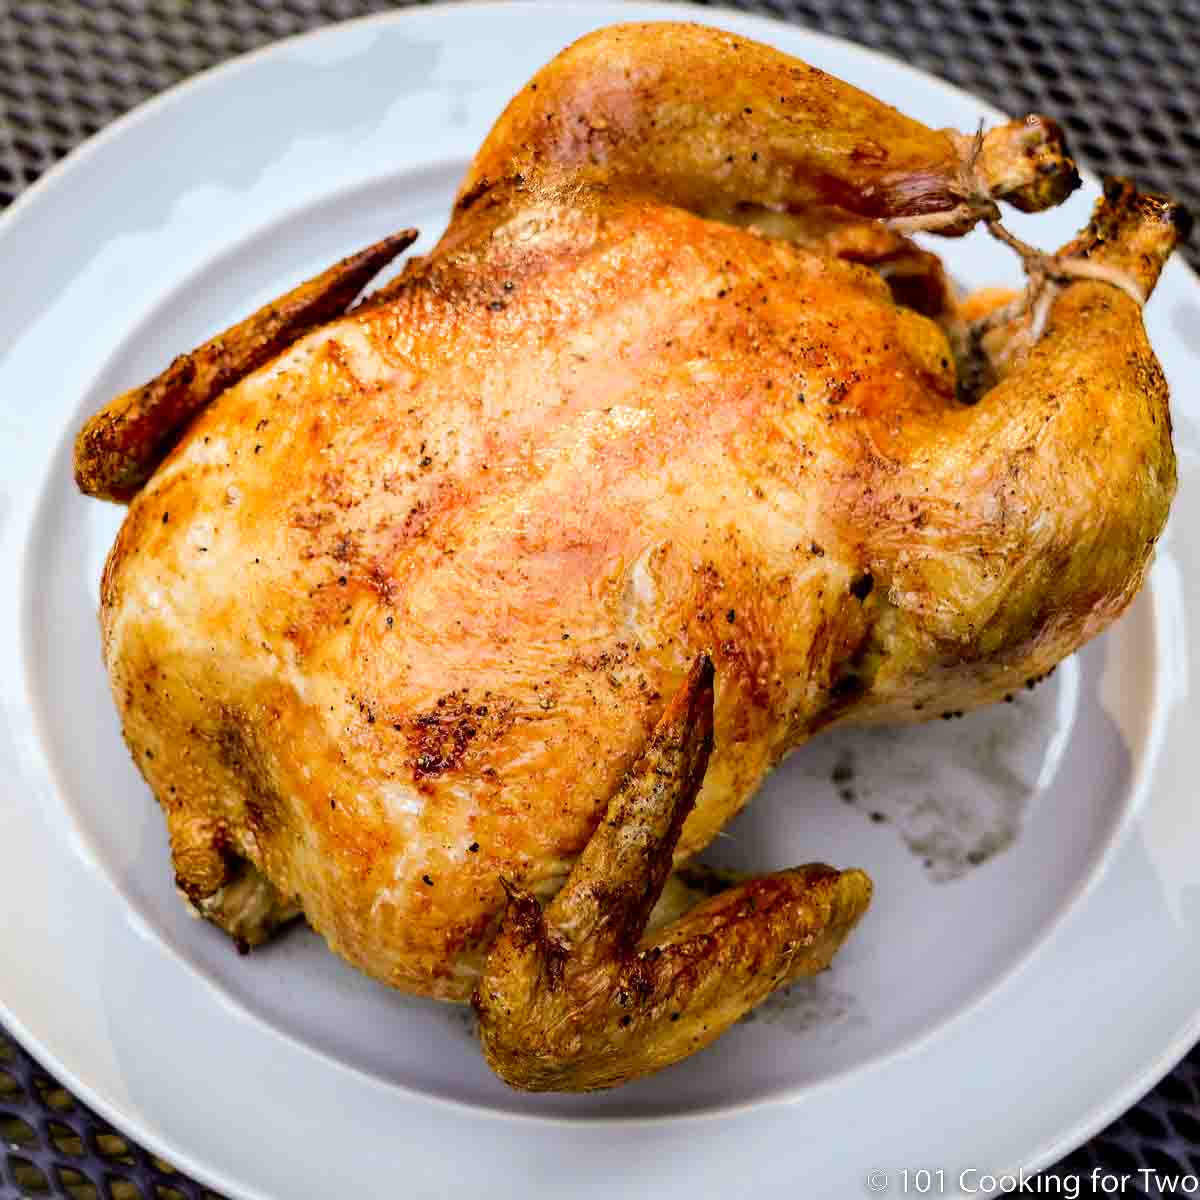 https://www.101cookingfortwo.com/wp-content/uploads/2023/01/Grilled-whole-chicken-on-a-gray-plate-2.jpg